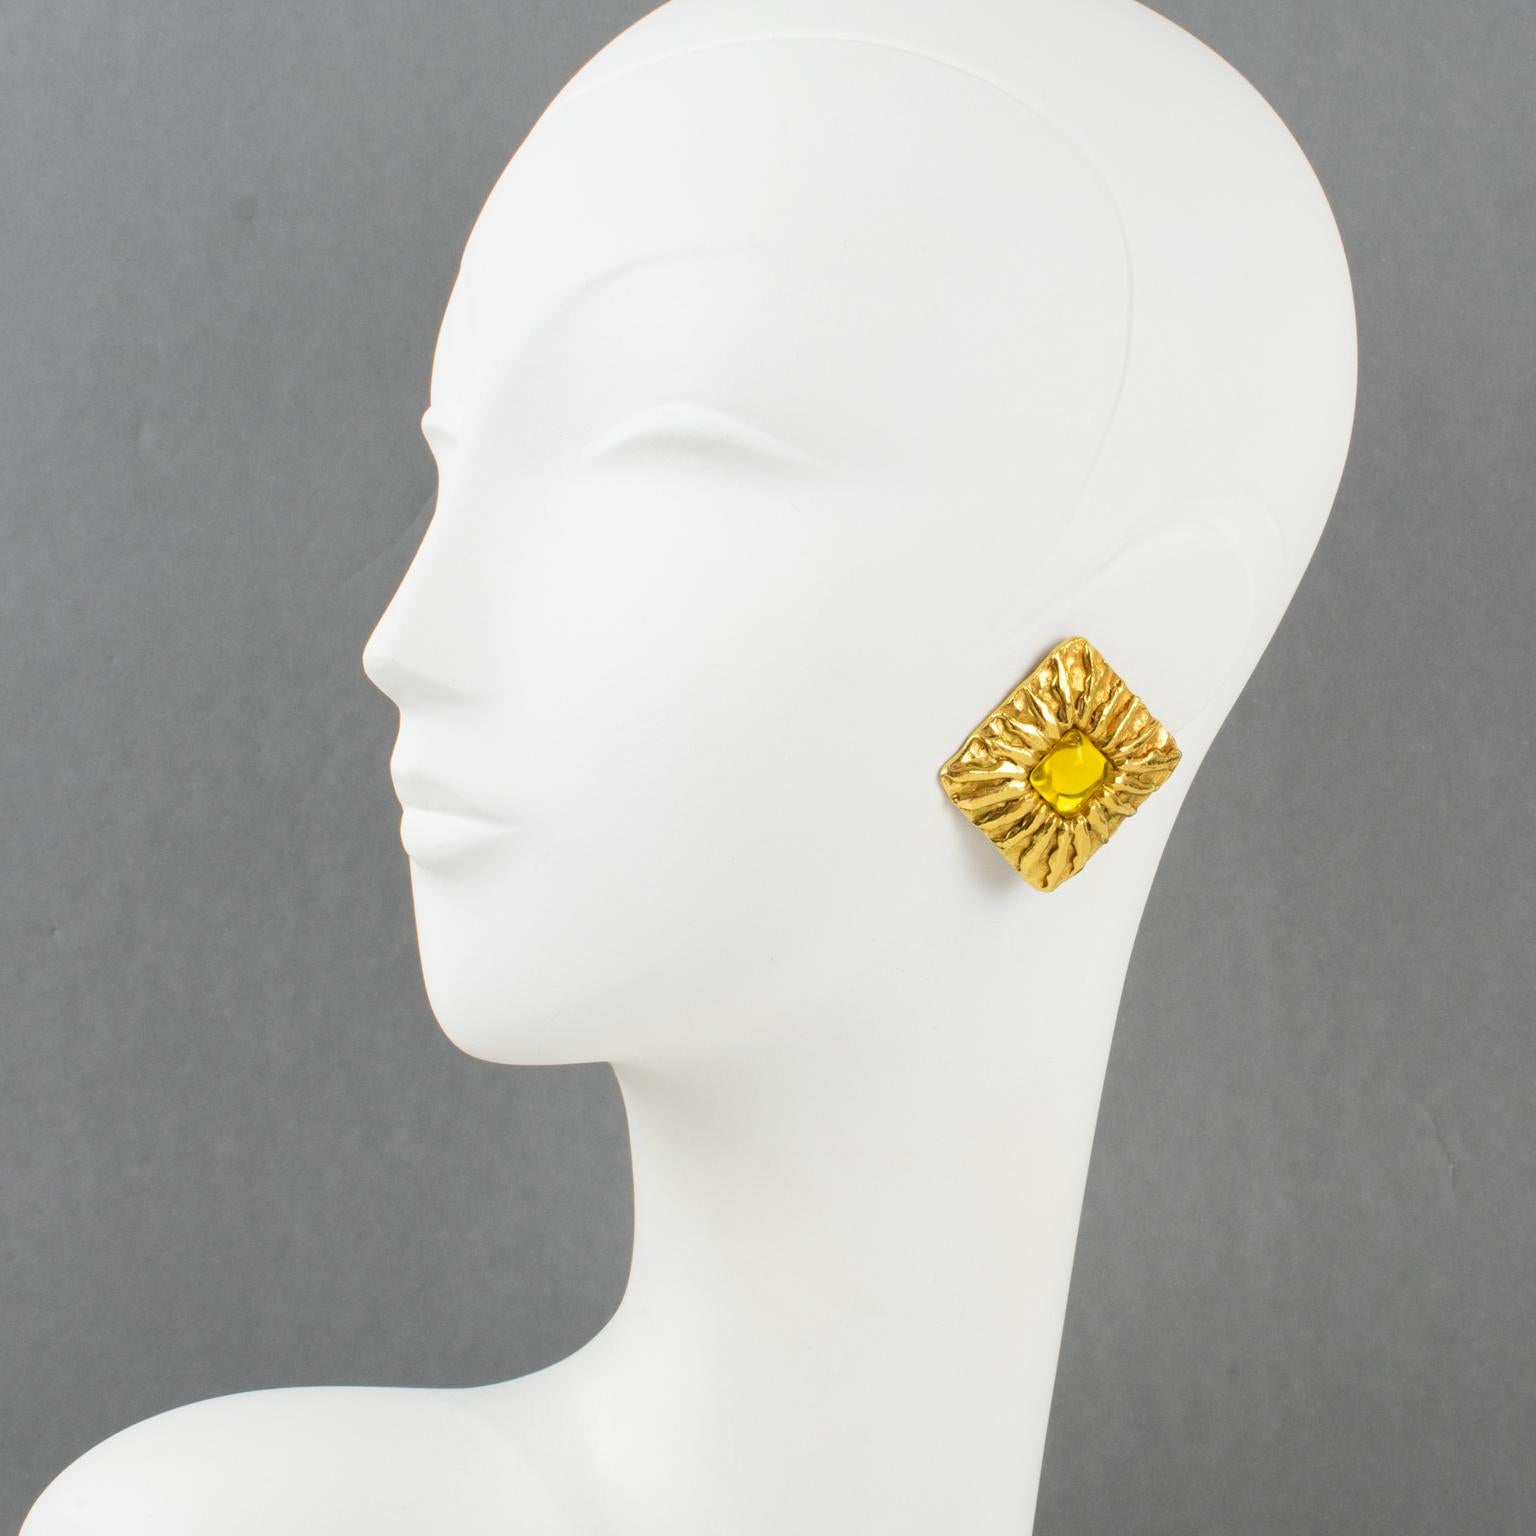 These lovely Jean Patou Paris signed clip-on earrings feature a gilt metal square shape with a carved sun pattern and are embellished with a bright yellow Gripoix poured glass cabochon in the center. Each piece is signed with a tag underside reading